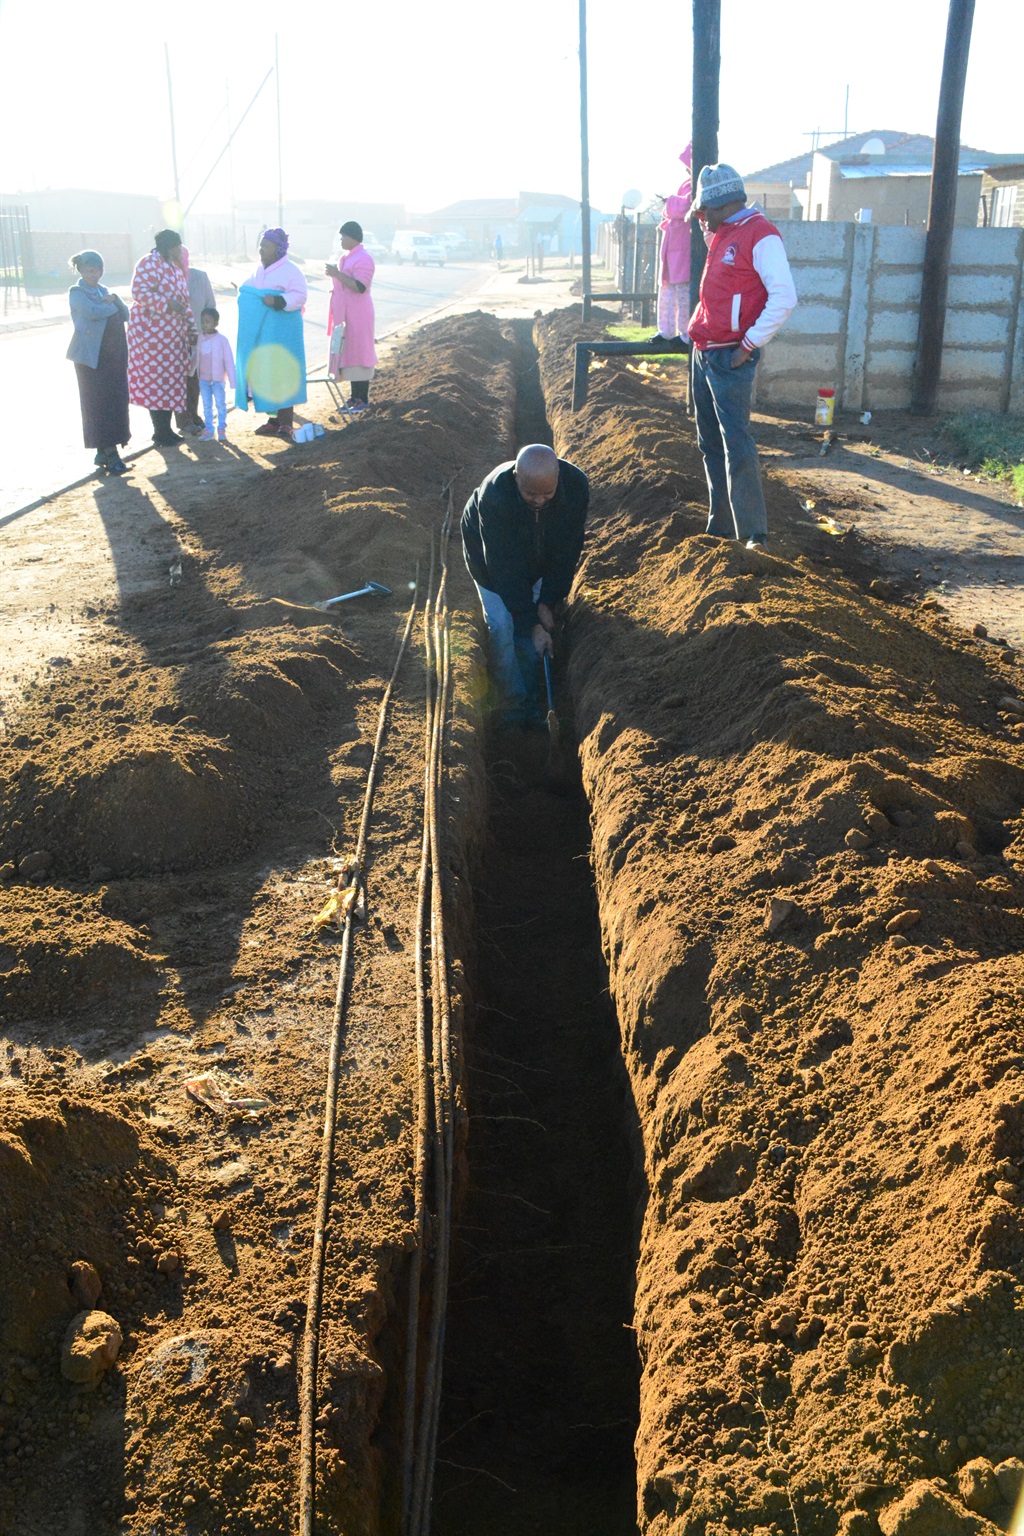 The community of Geluksdal in Ekurhuleni says they are tired of Izinyoka, so they dig up holes for for themselves to put down the cables. Photo by Muntu Nkosi